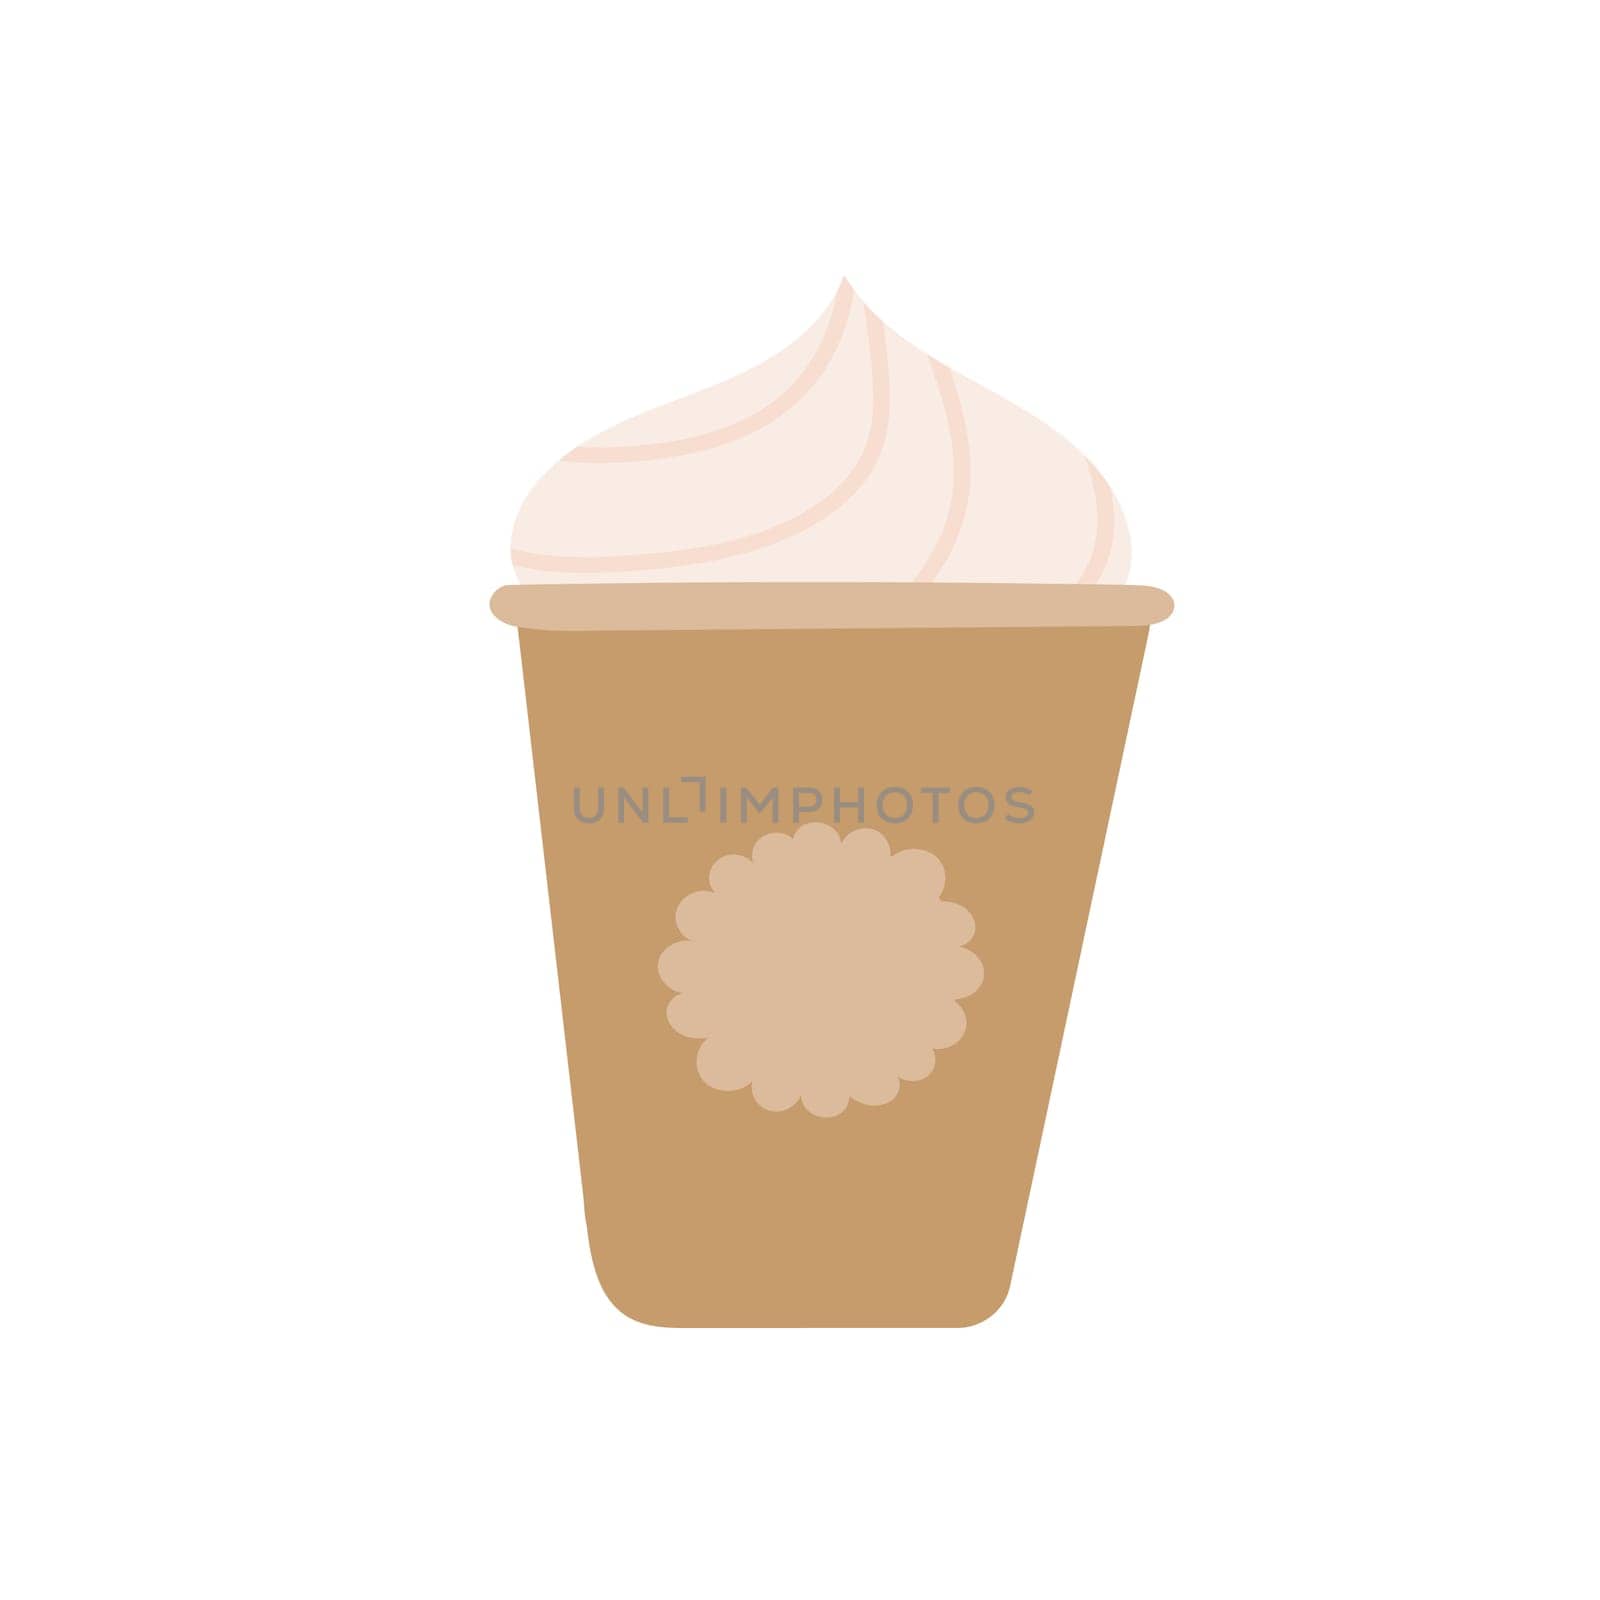 Hand drawn illustration of paper cup with ice cream or gelato or frozen yogurt in soft color. Isolated on white background.